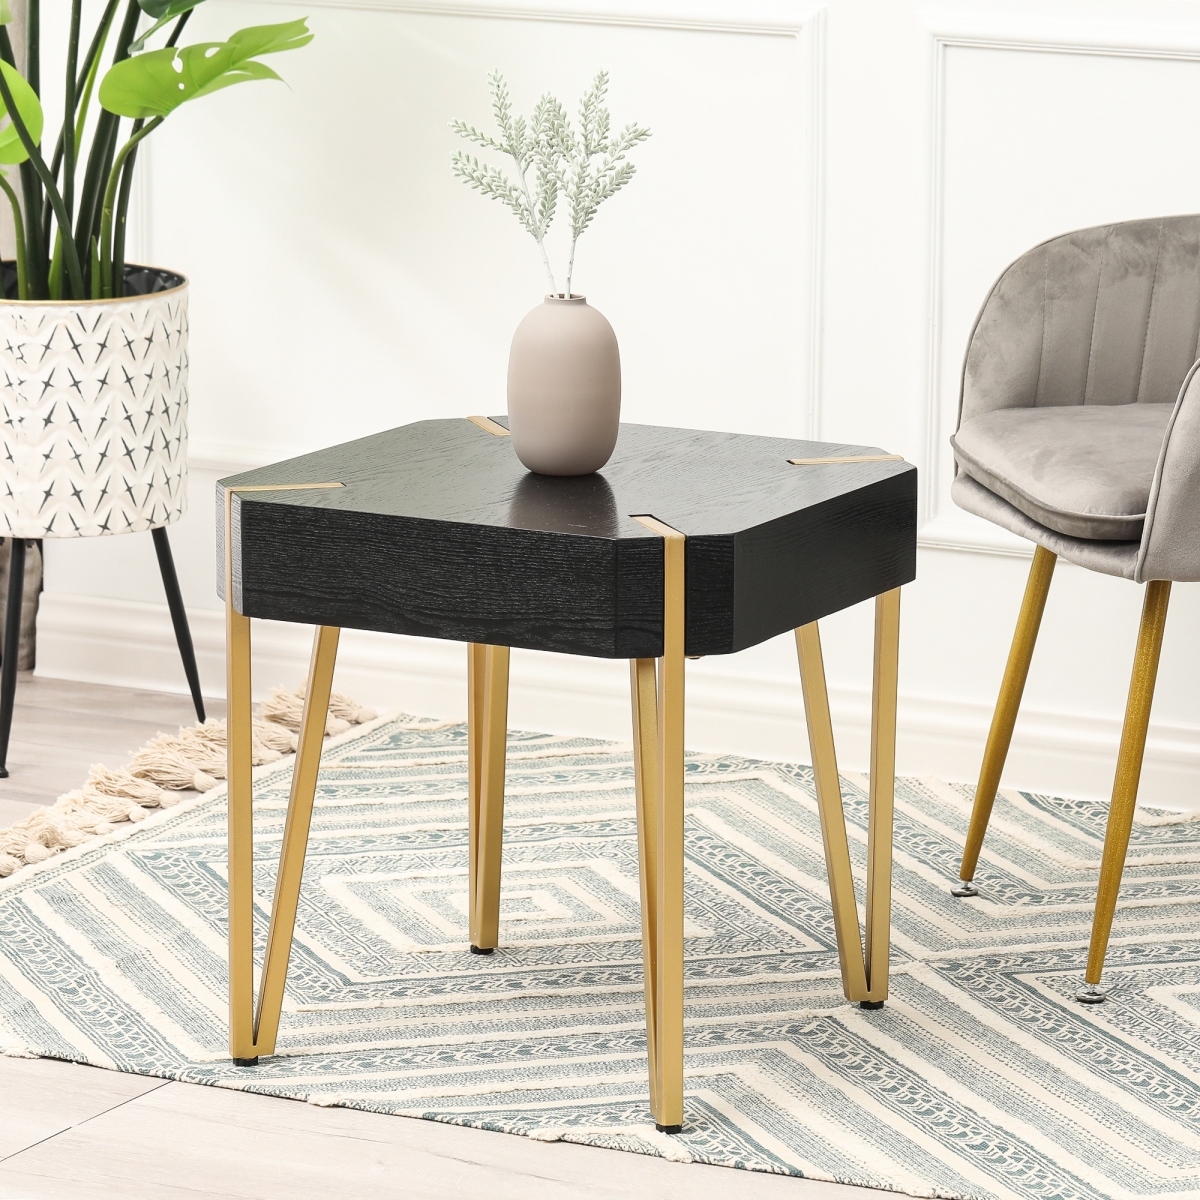 Whif1202 Side Table, Wood & Metal